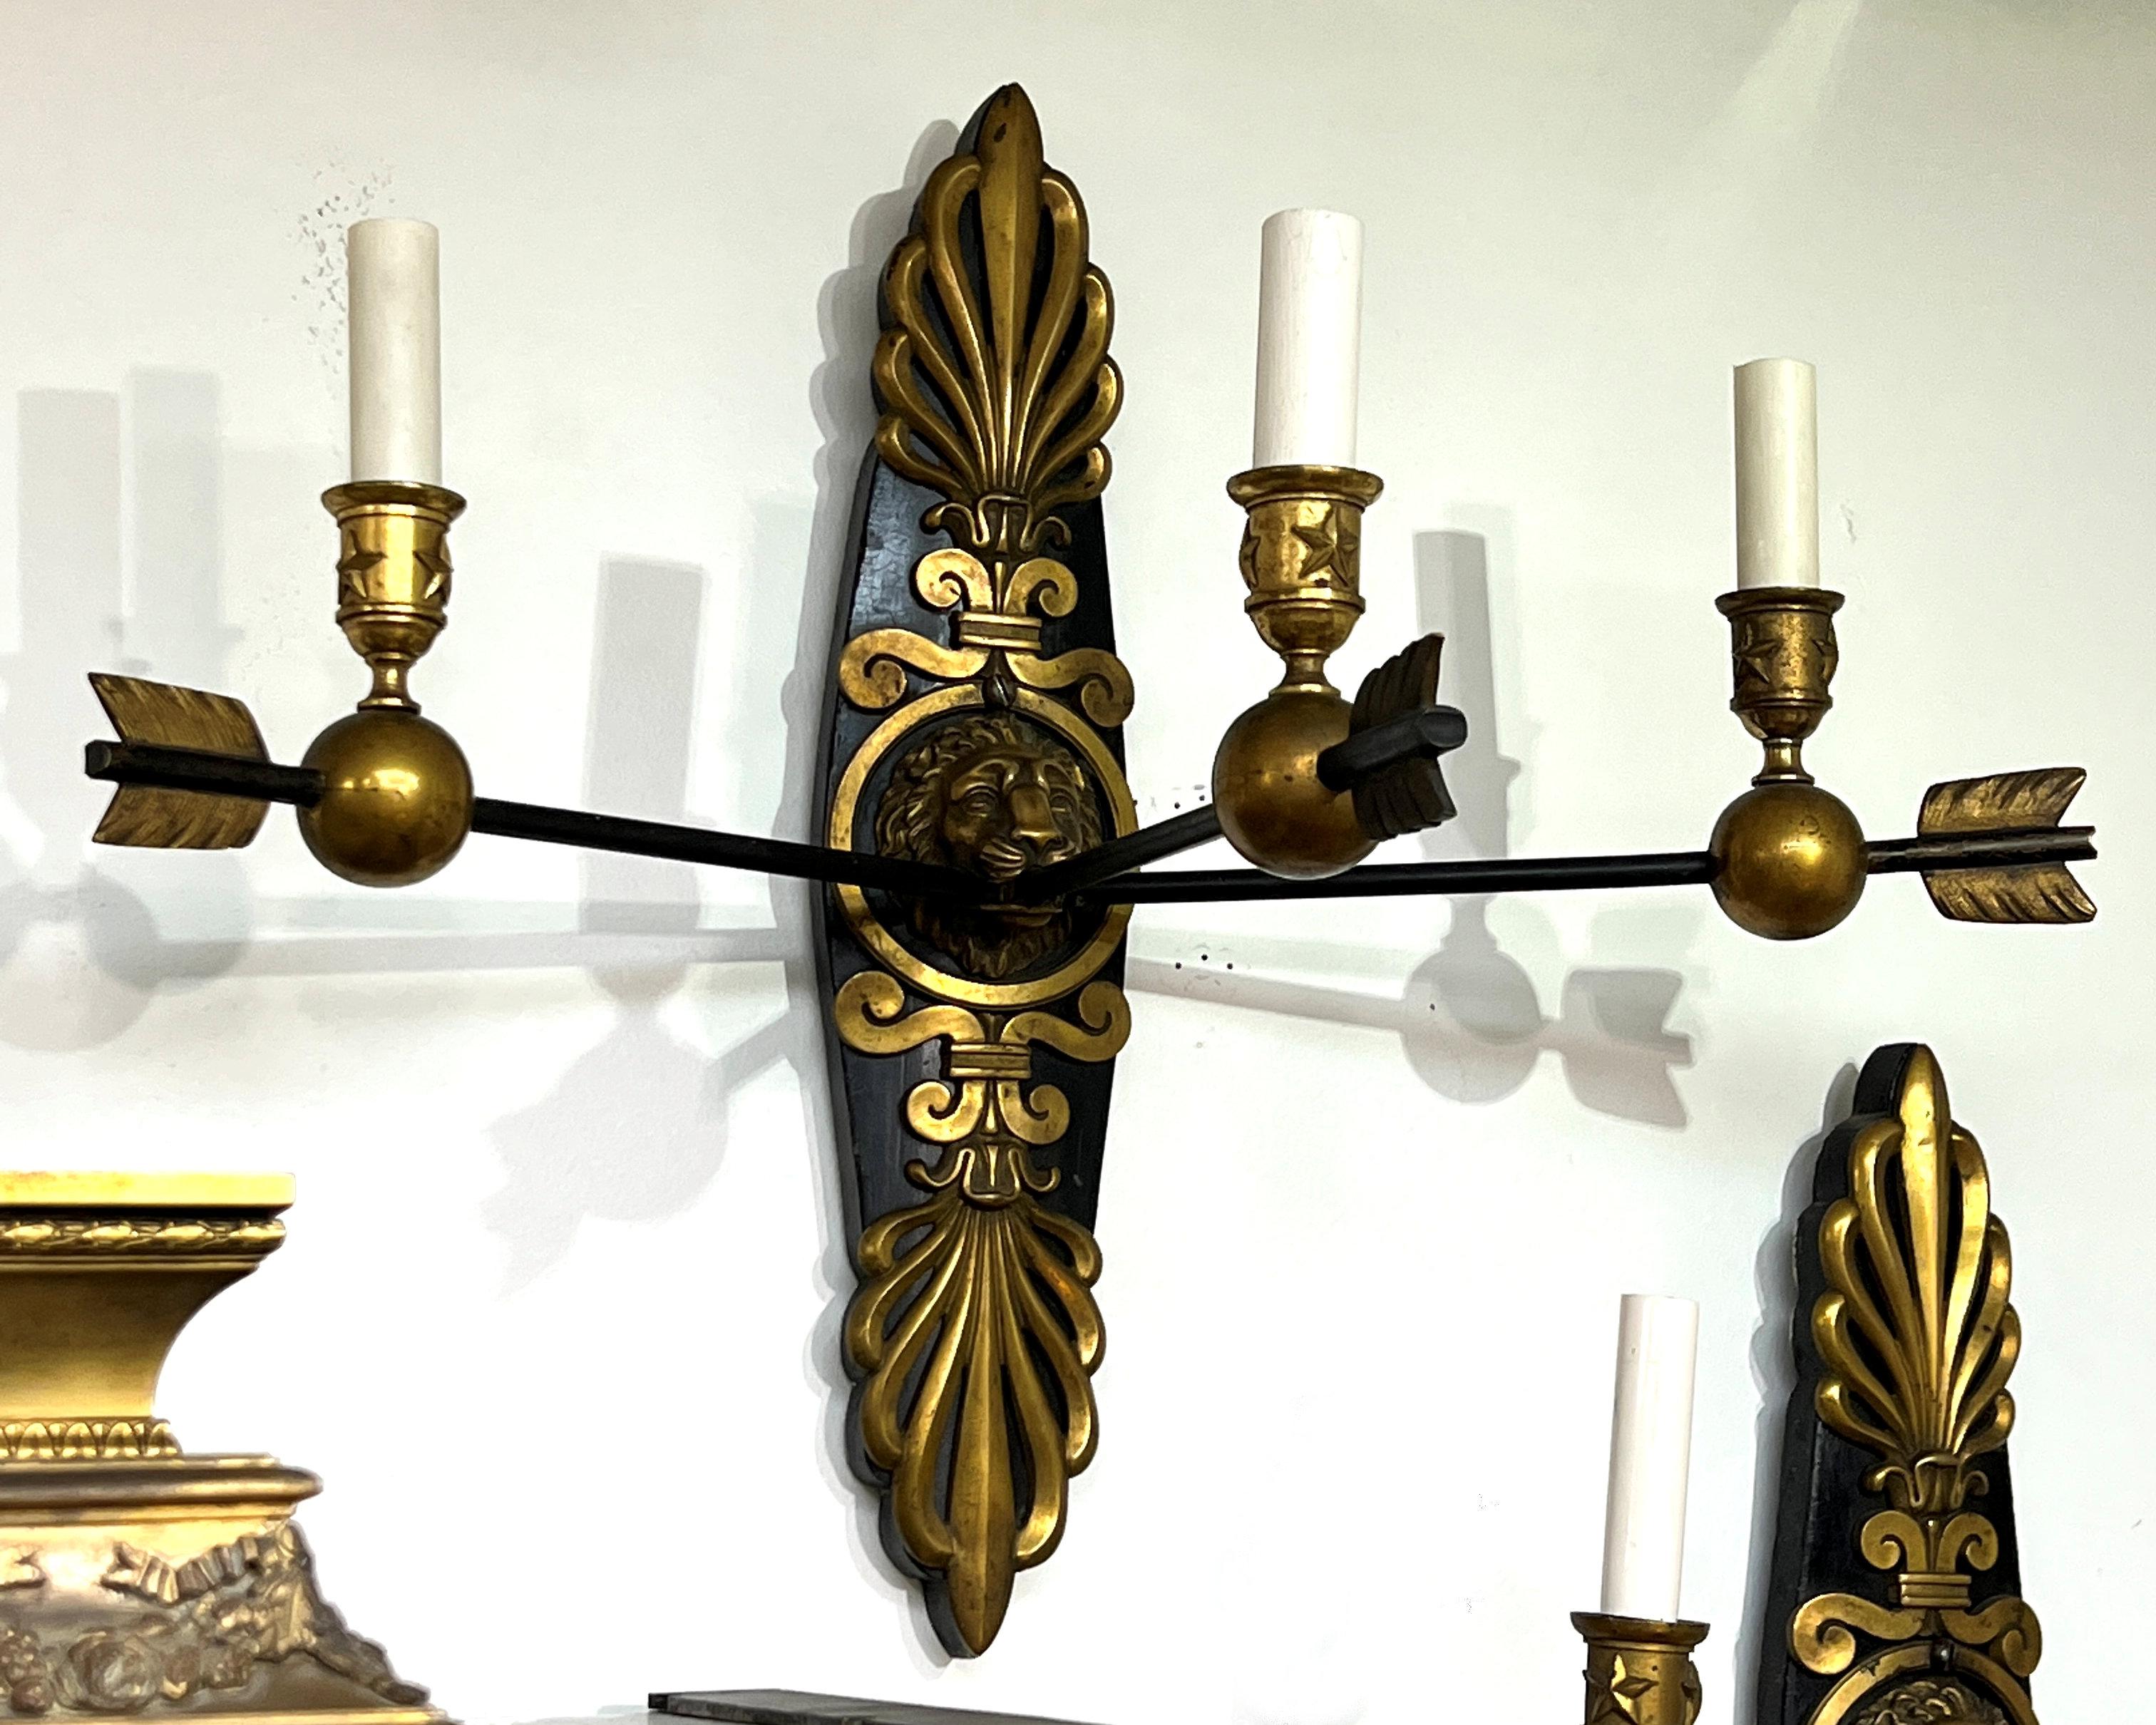 Our French Empire style sconces have three arrow-form candle arms ending with candleholders with star motifs, and emanate from lion mask back plates with palmette crests that are mounted on ebonized wooden back plates. Standard size sockets with